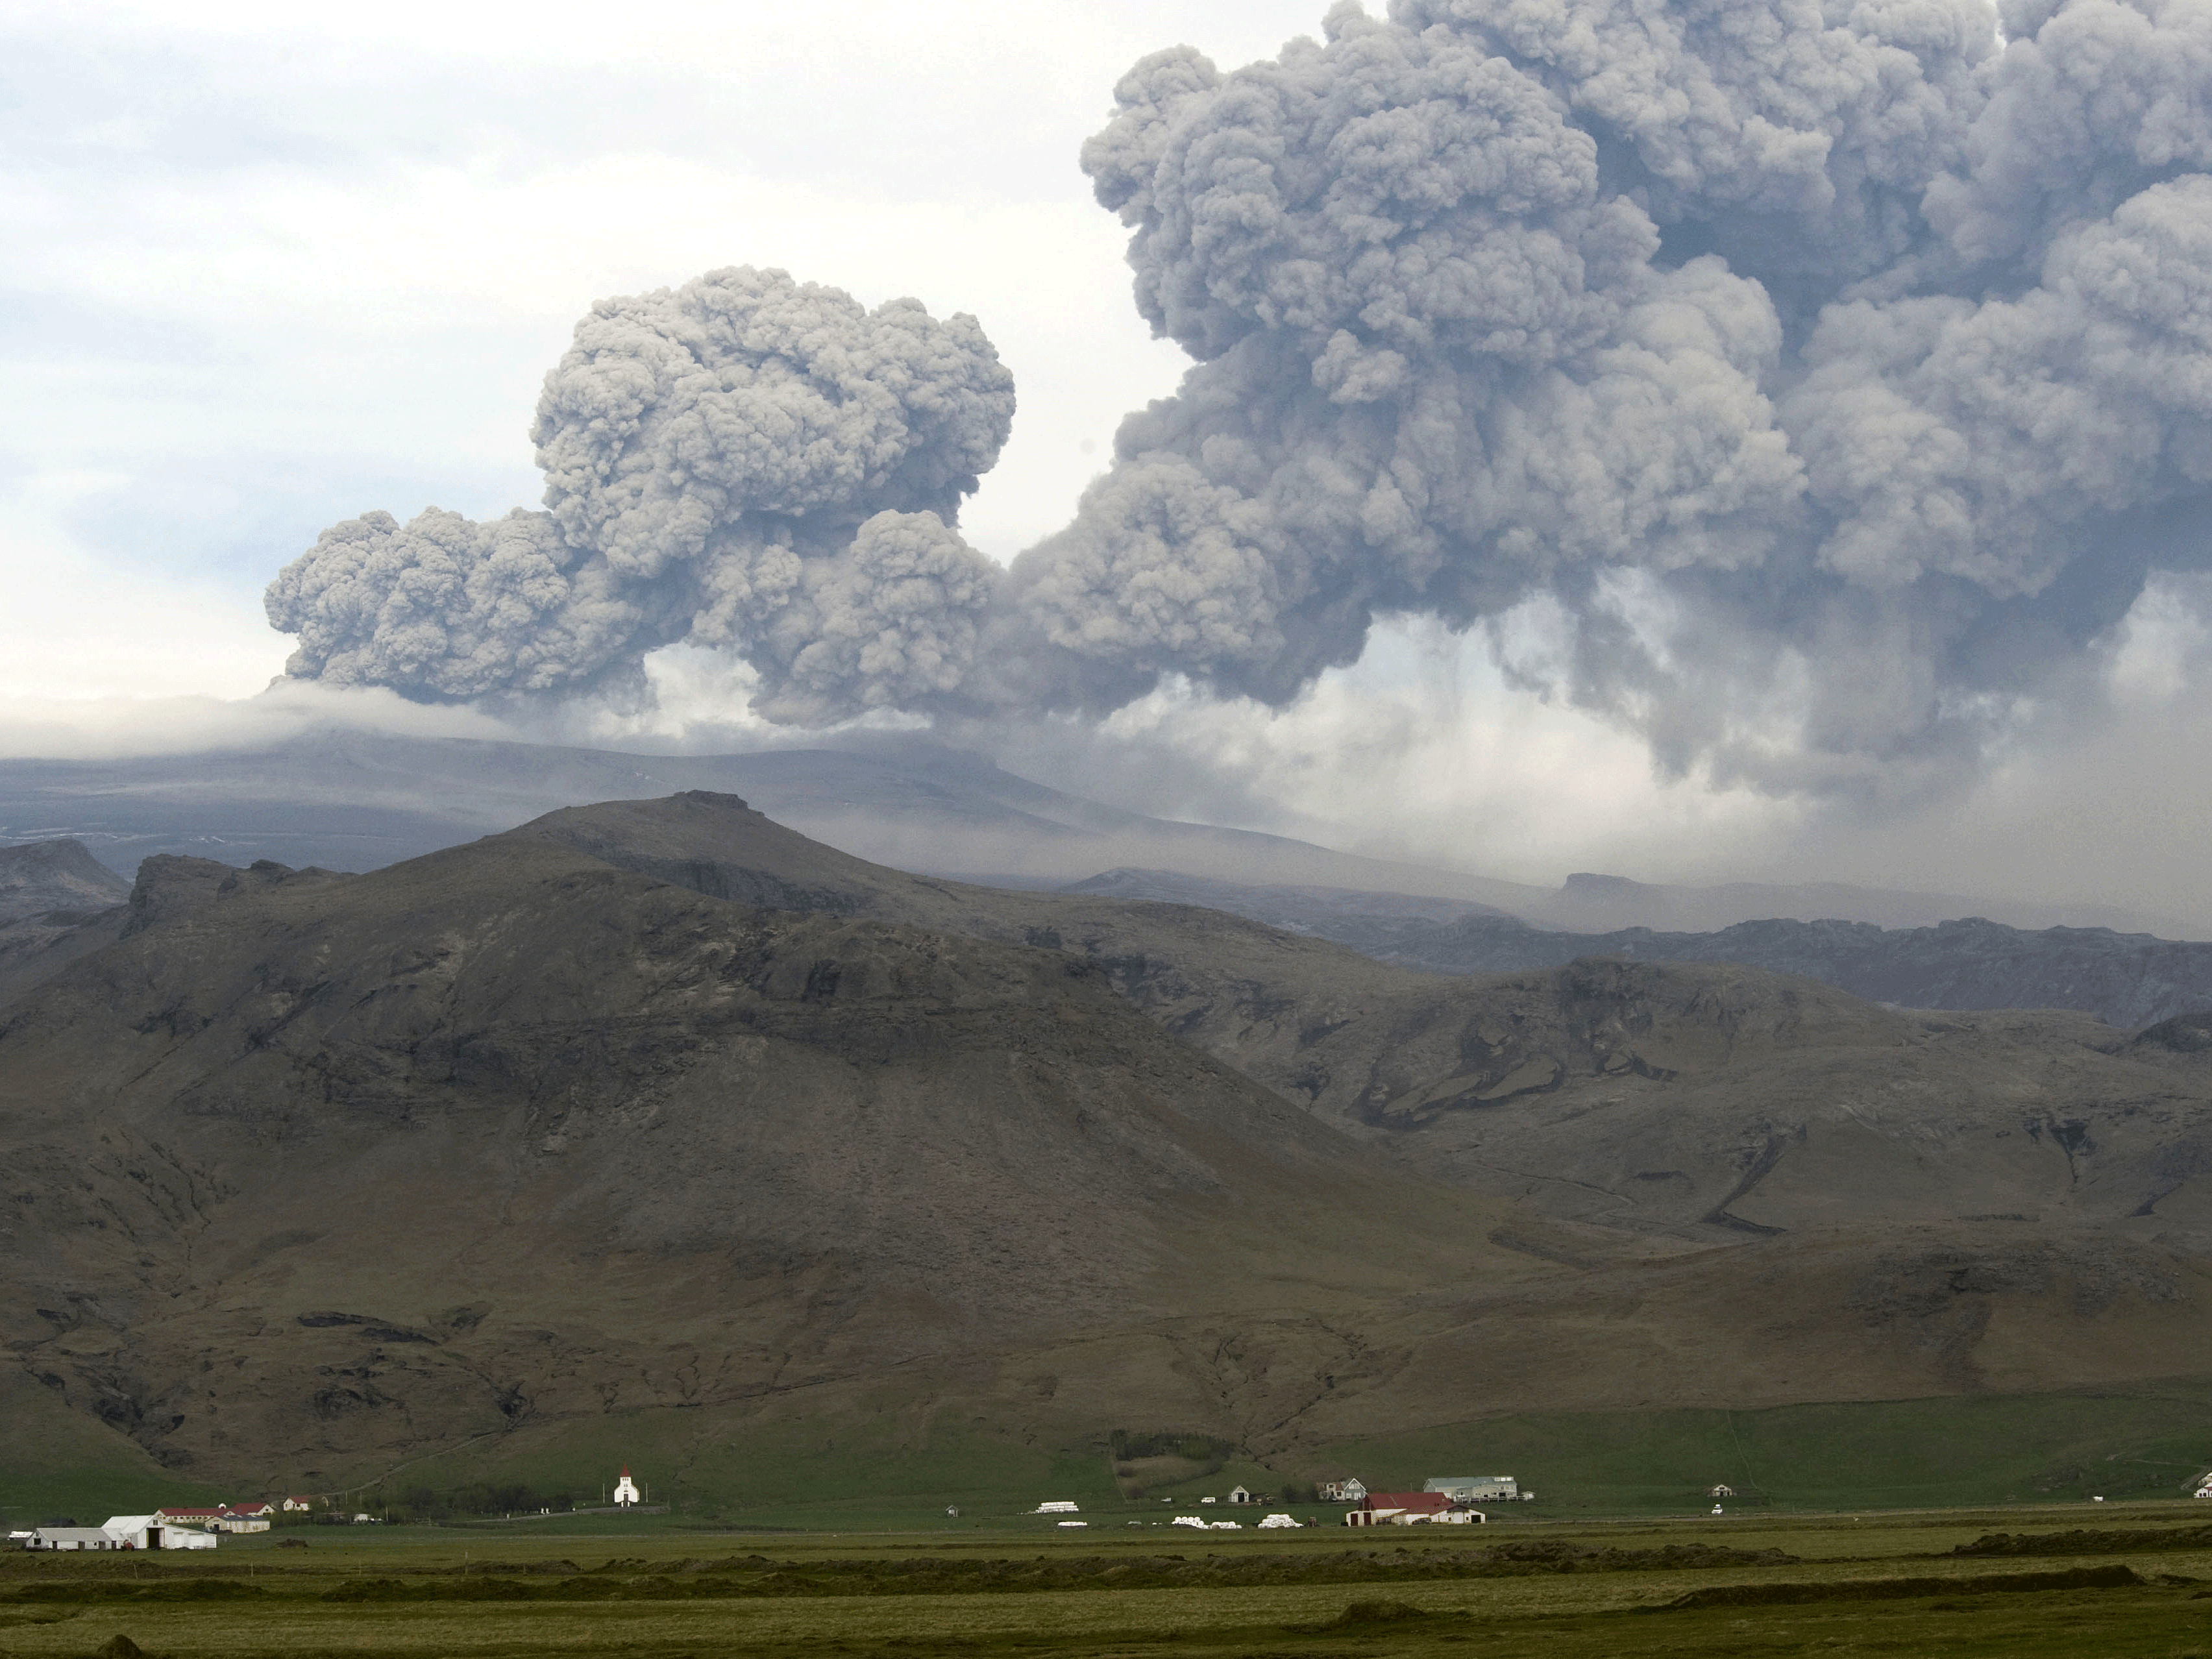 The eruption of Eyjafjallajökull in 2010 led to cancelled flights and frustrated passengers — could we be in for another period of disruption?